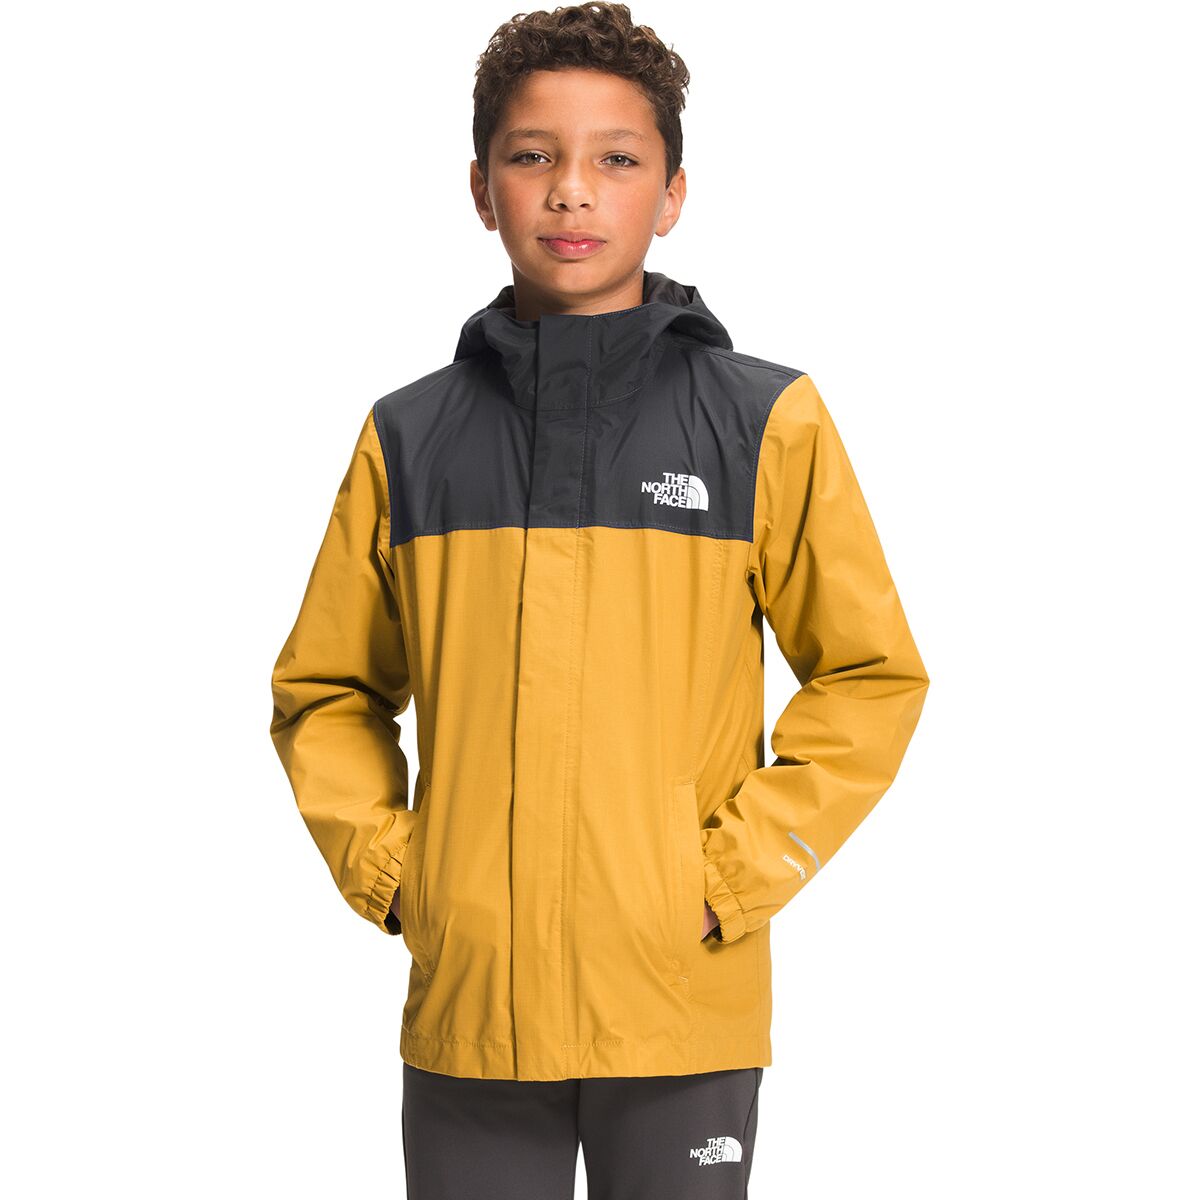 The North Face Resolve Reflective Hooded Jacket - Boys' - Kids